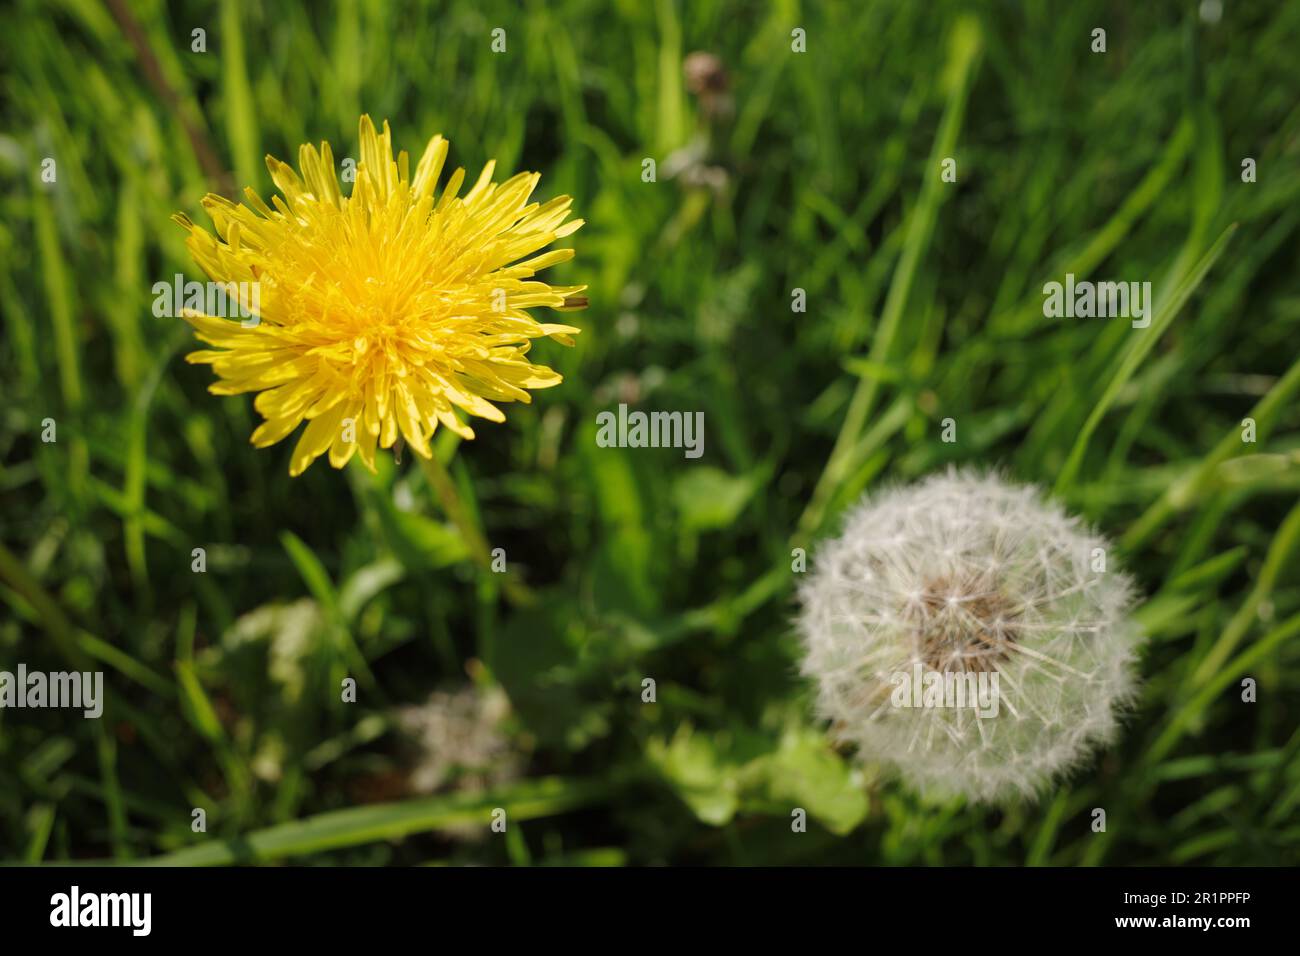 Dandelion flower and seed head Stock Photo